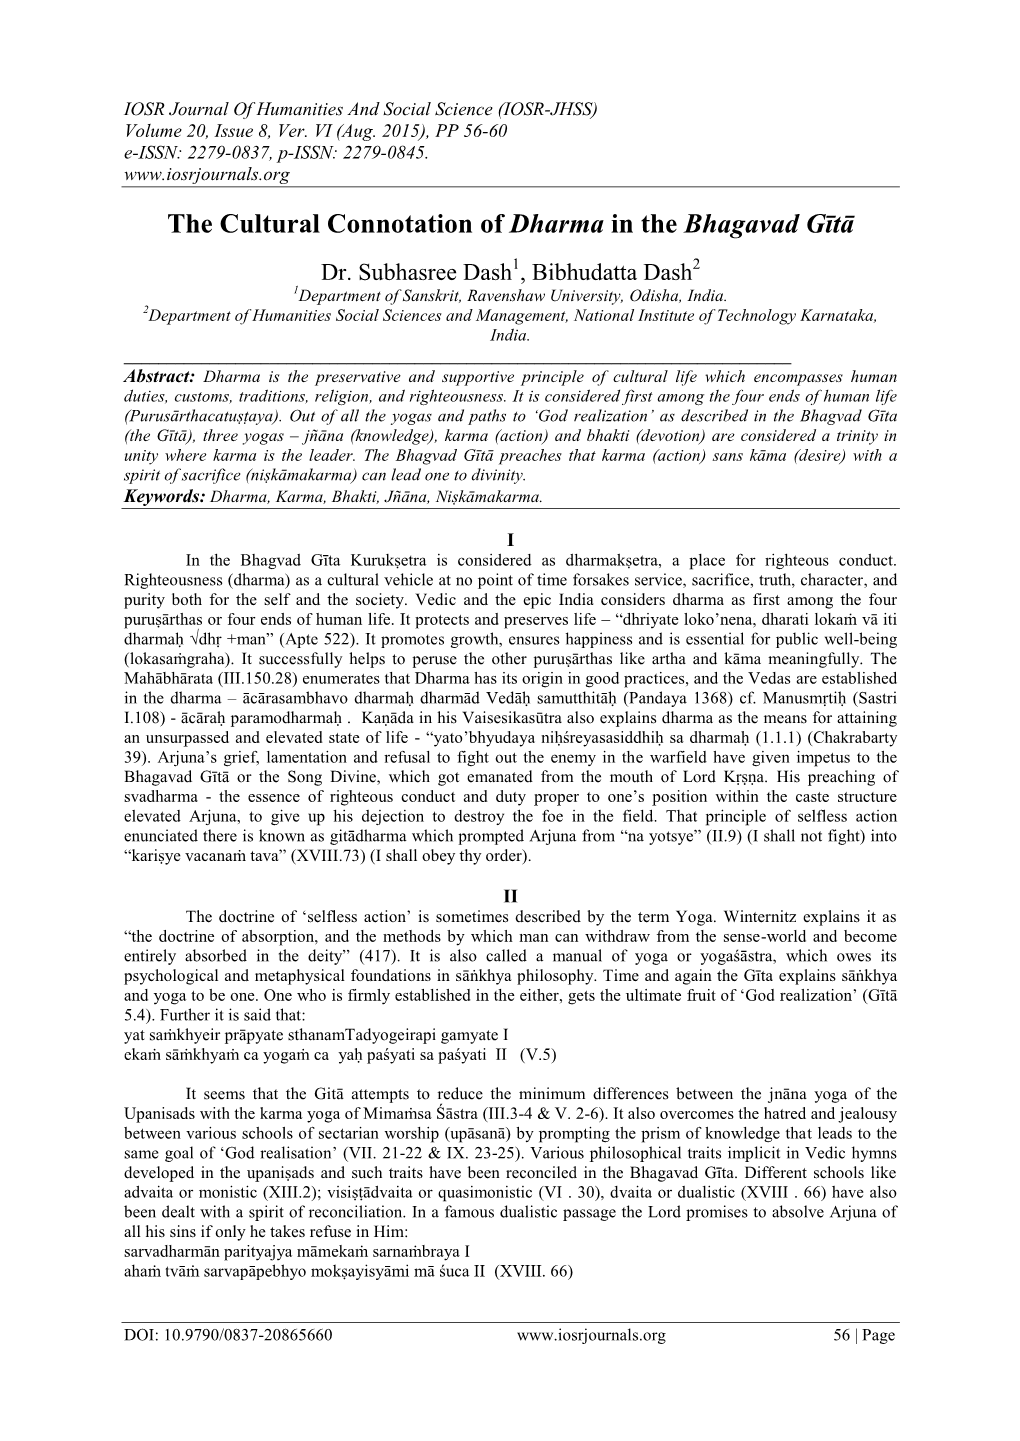 The Cultural Connotation of Dharma in the Bhagavad Gītā